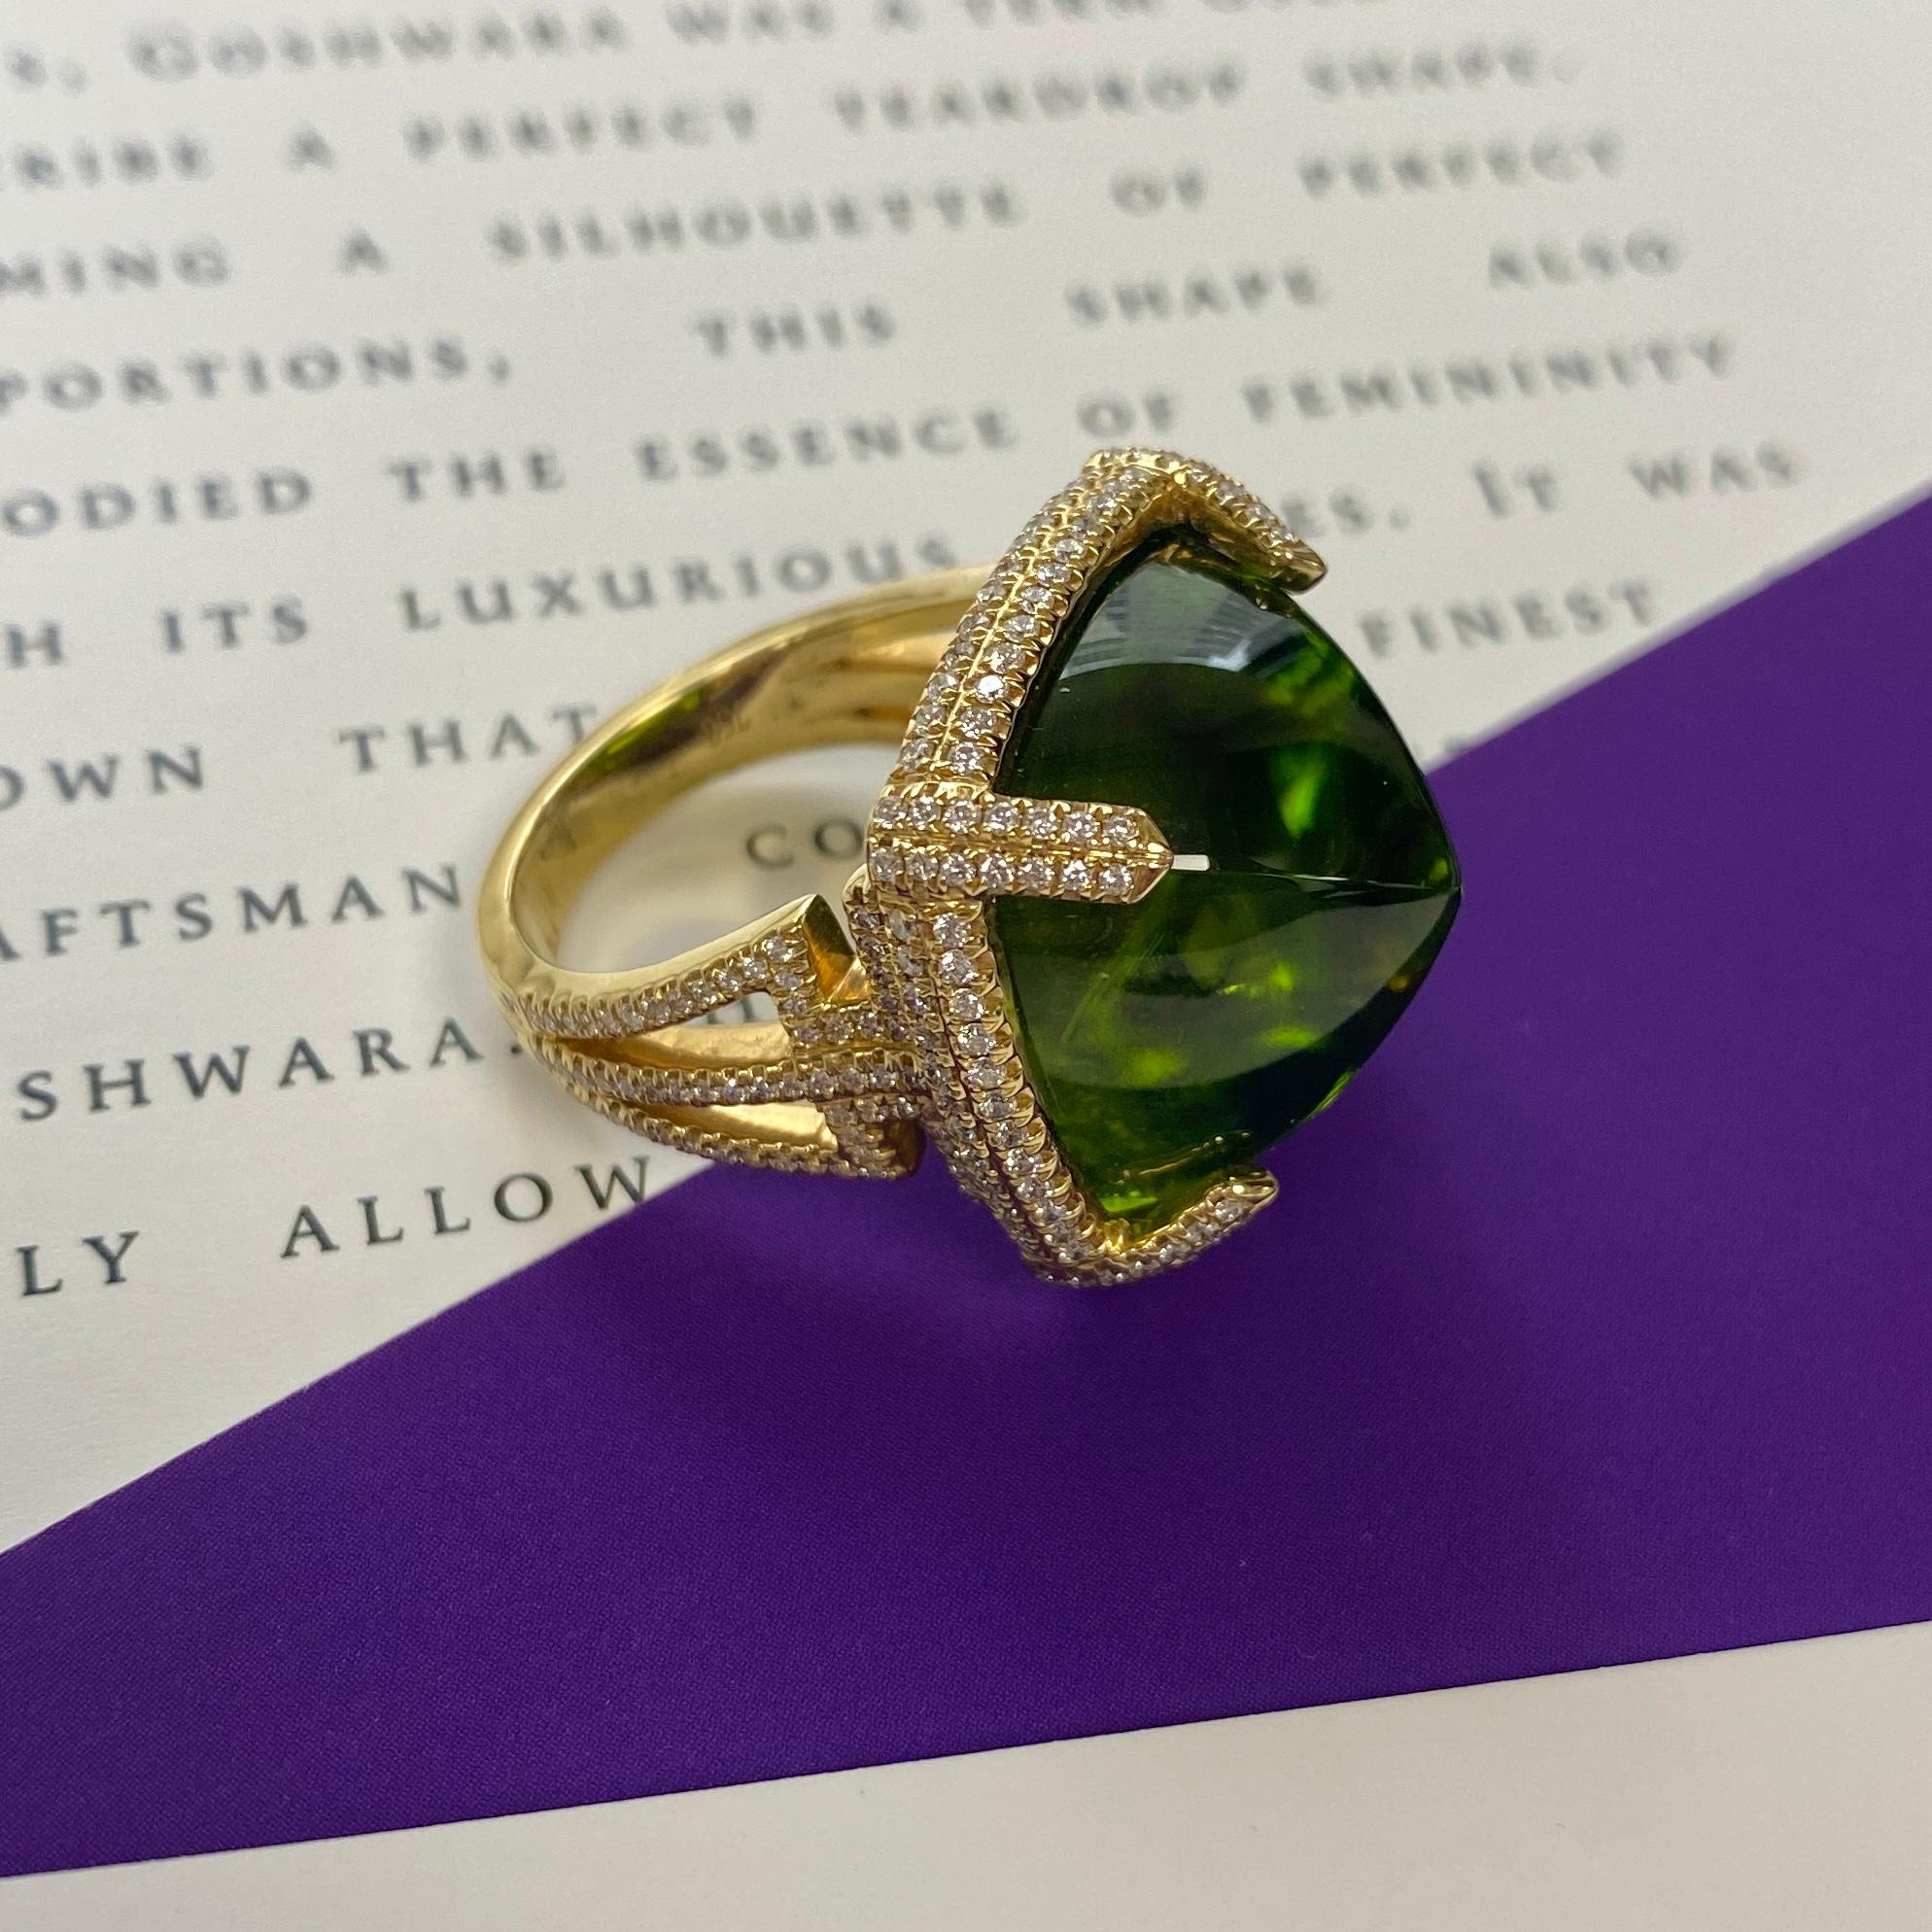 Peridot Sugar Loaf Square Cab Ring with Diamonds in 18k Yellow Gold, from 'Rock N Roll' Coolection

Stone size: 19 mm

Gemstone Weight: Peridot- 37.16 Carats

Diamond: G-H / VS, Approx Wt: 0.96 Carats